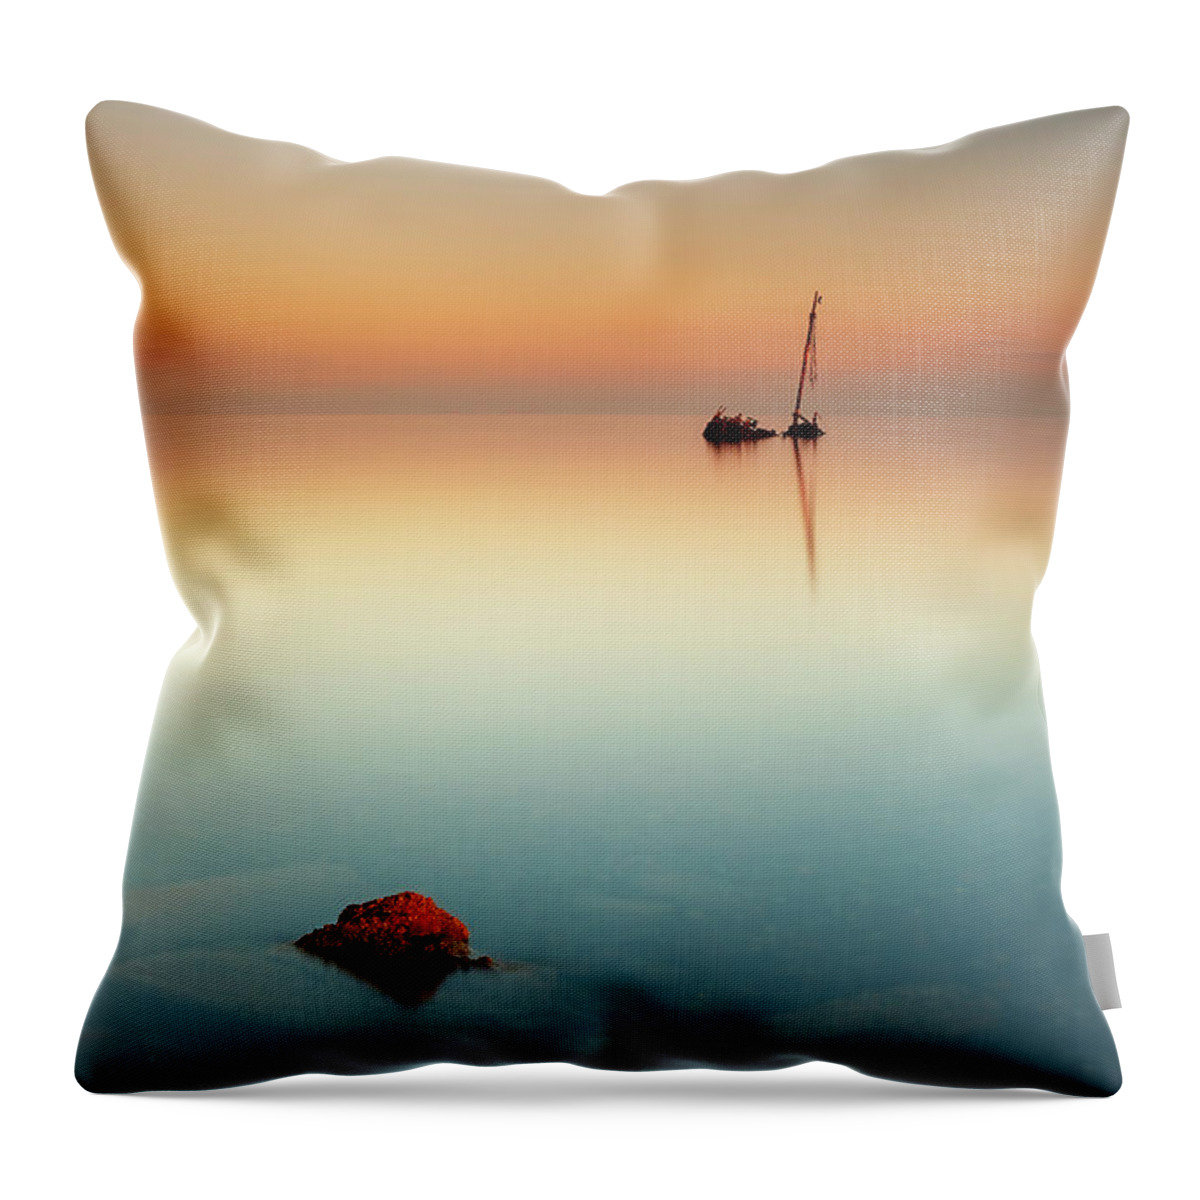 Shipwreck Throw Pillow featuring the photograph Flat calm shipwreck by Grant Glendinning